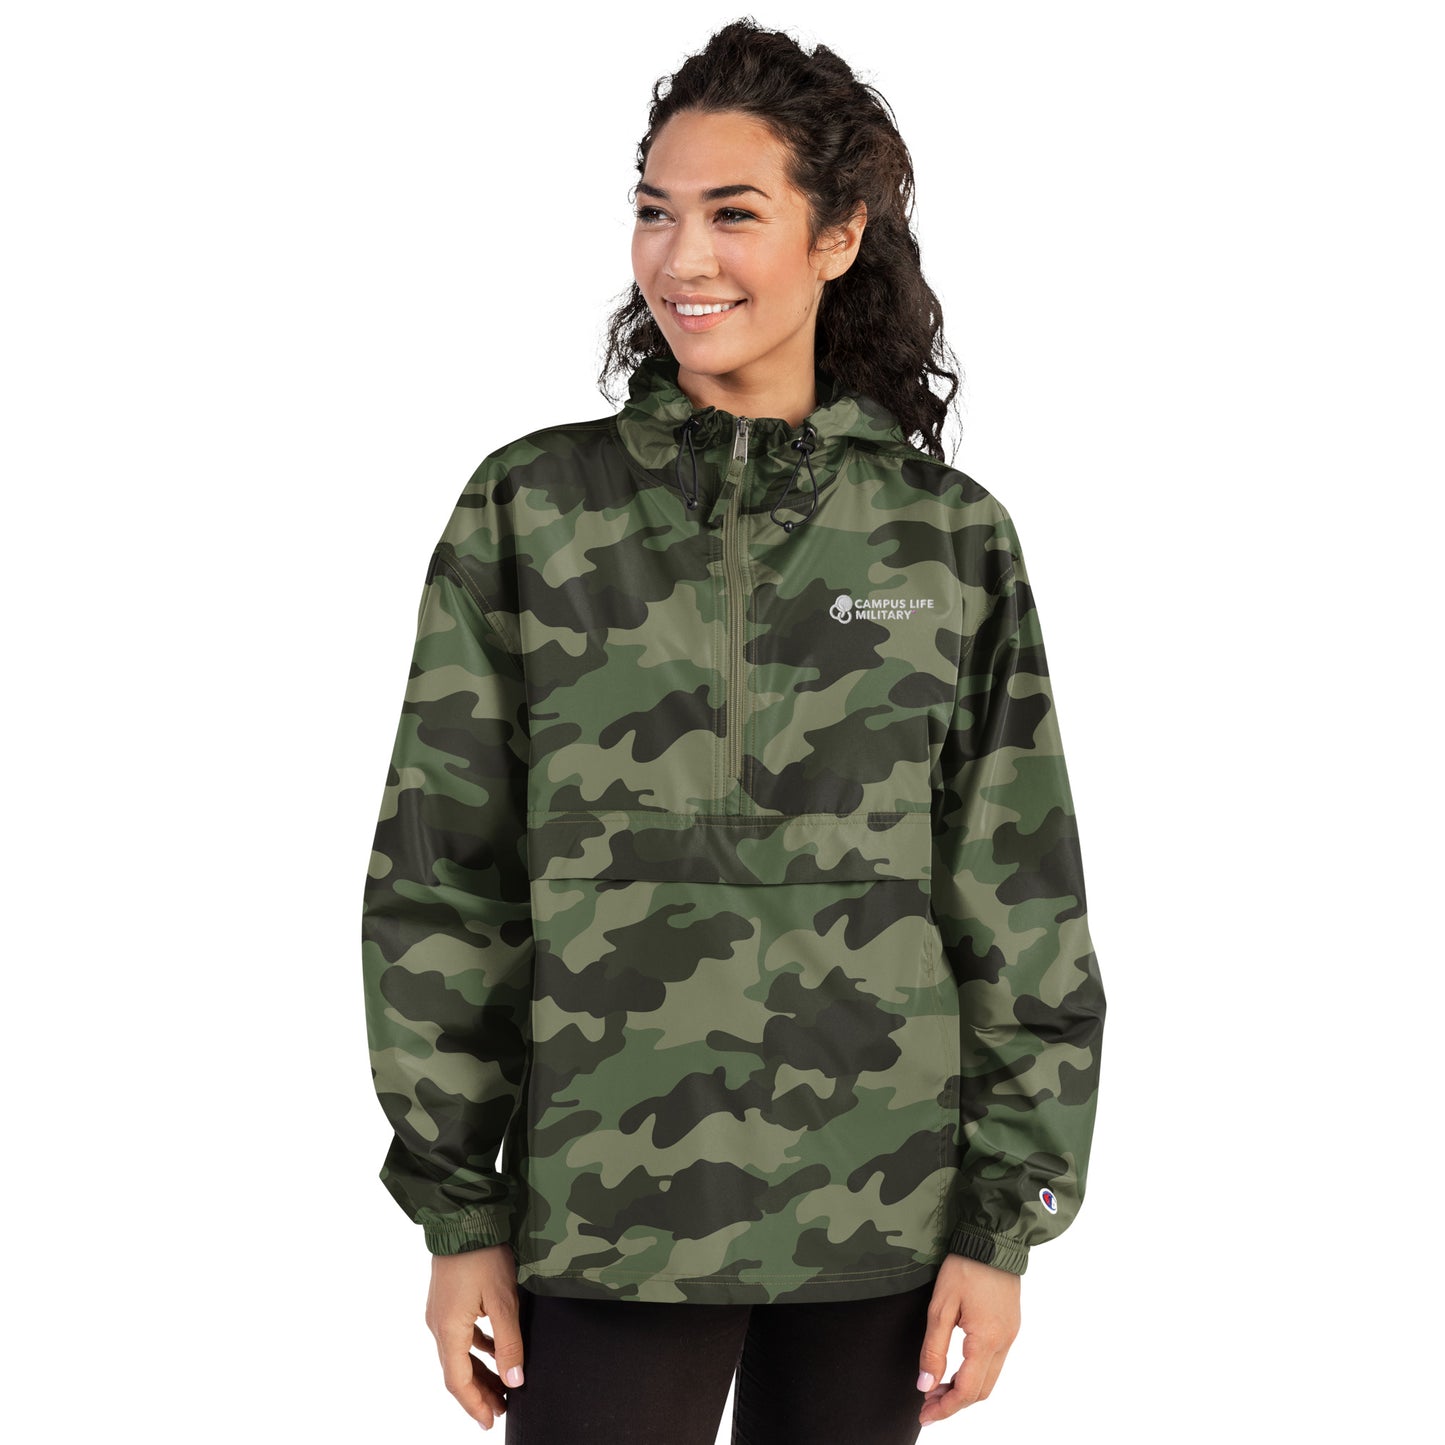 Campus Life Military Embroidered Champion Packable Jacket